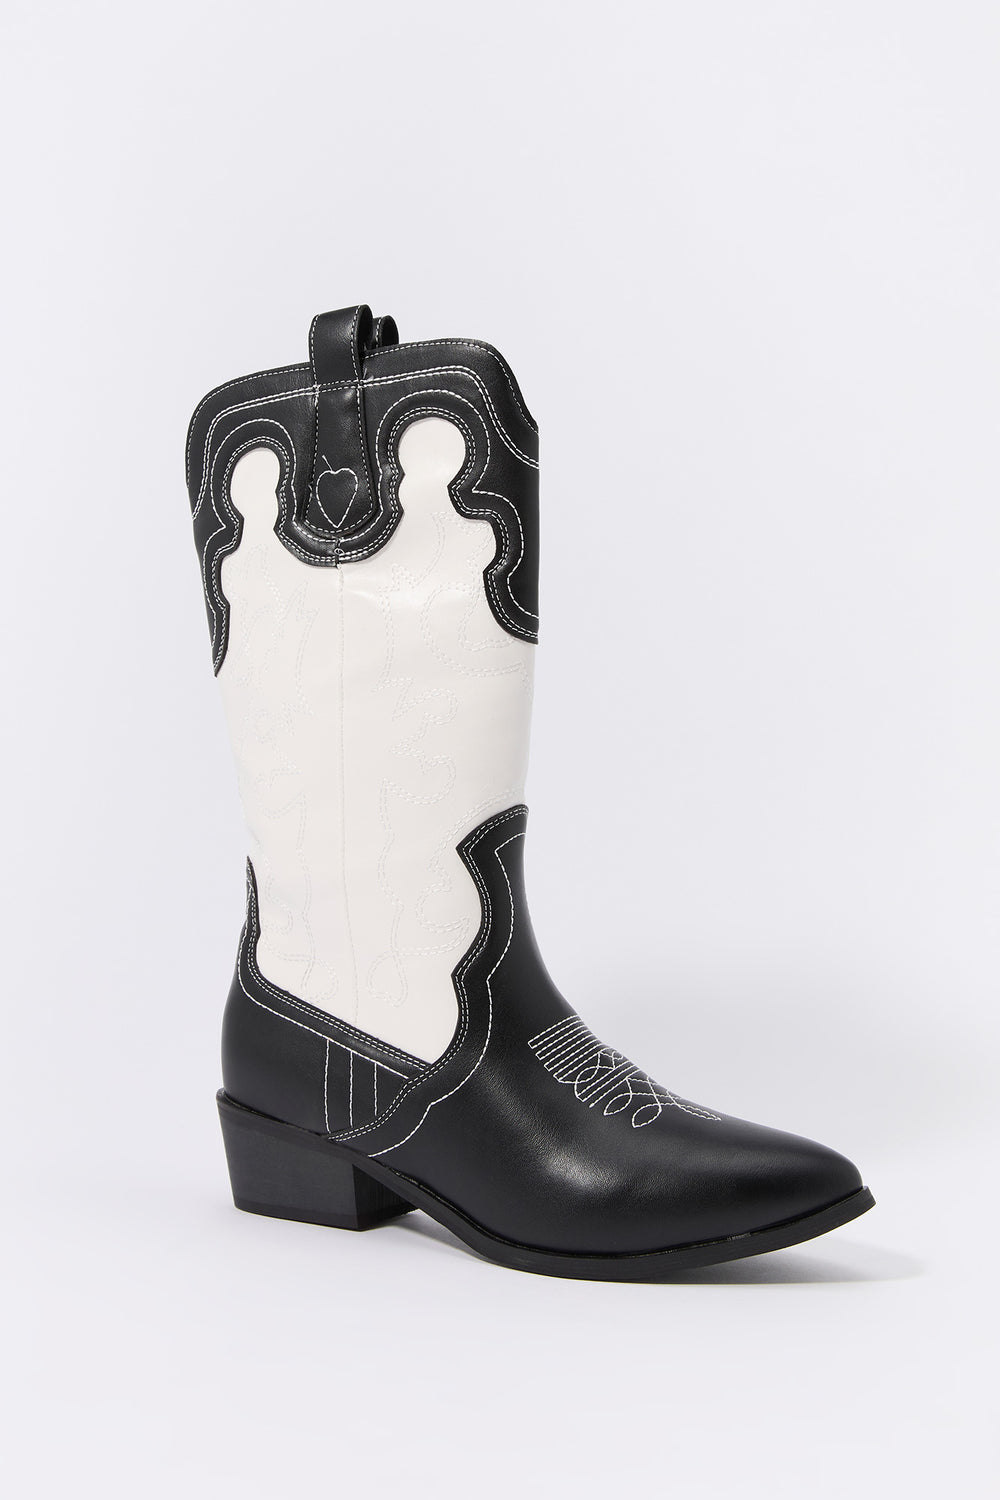 Black and White Cowboy Boot Black and White Cowboy Boot 2